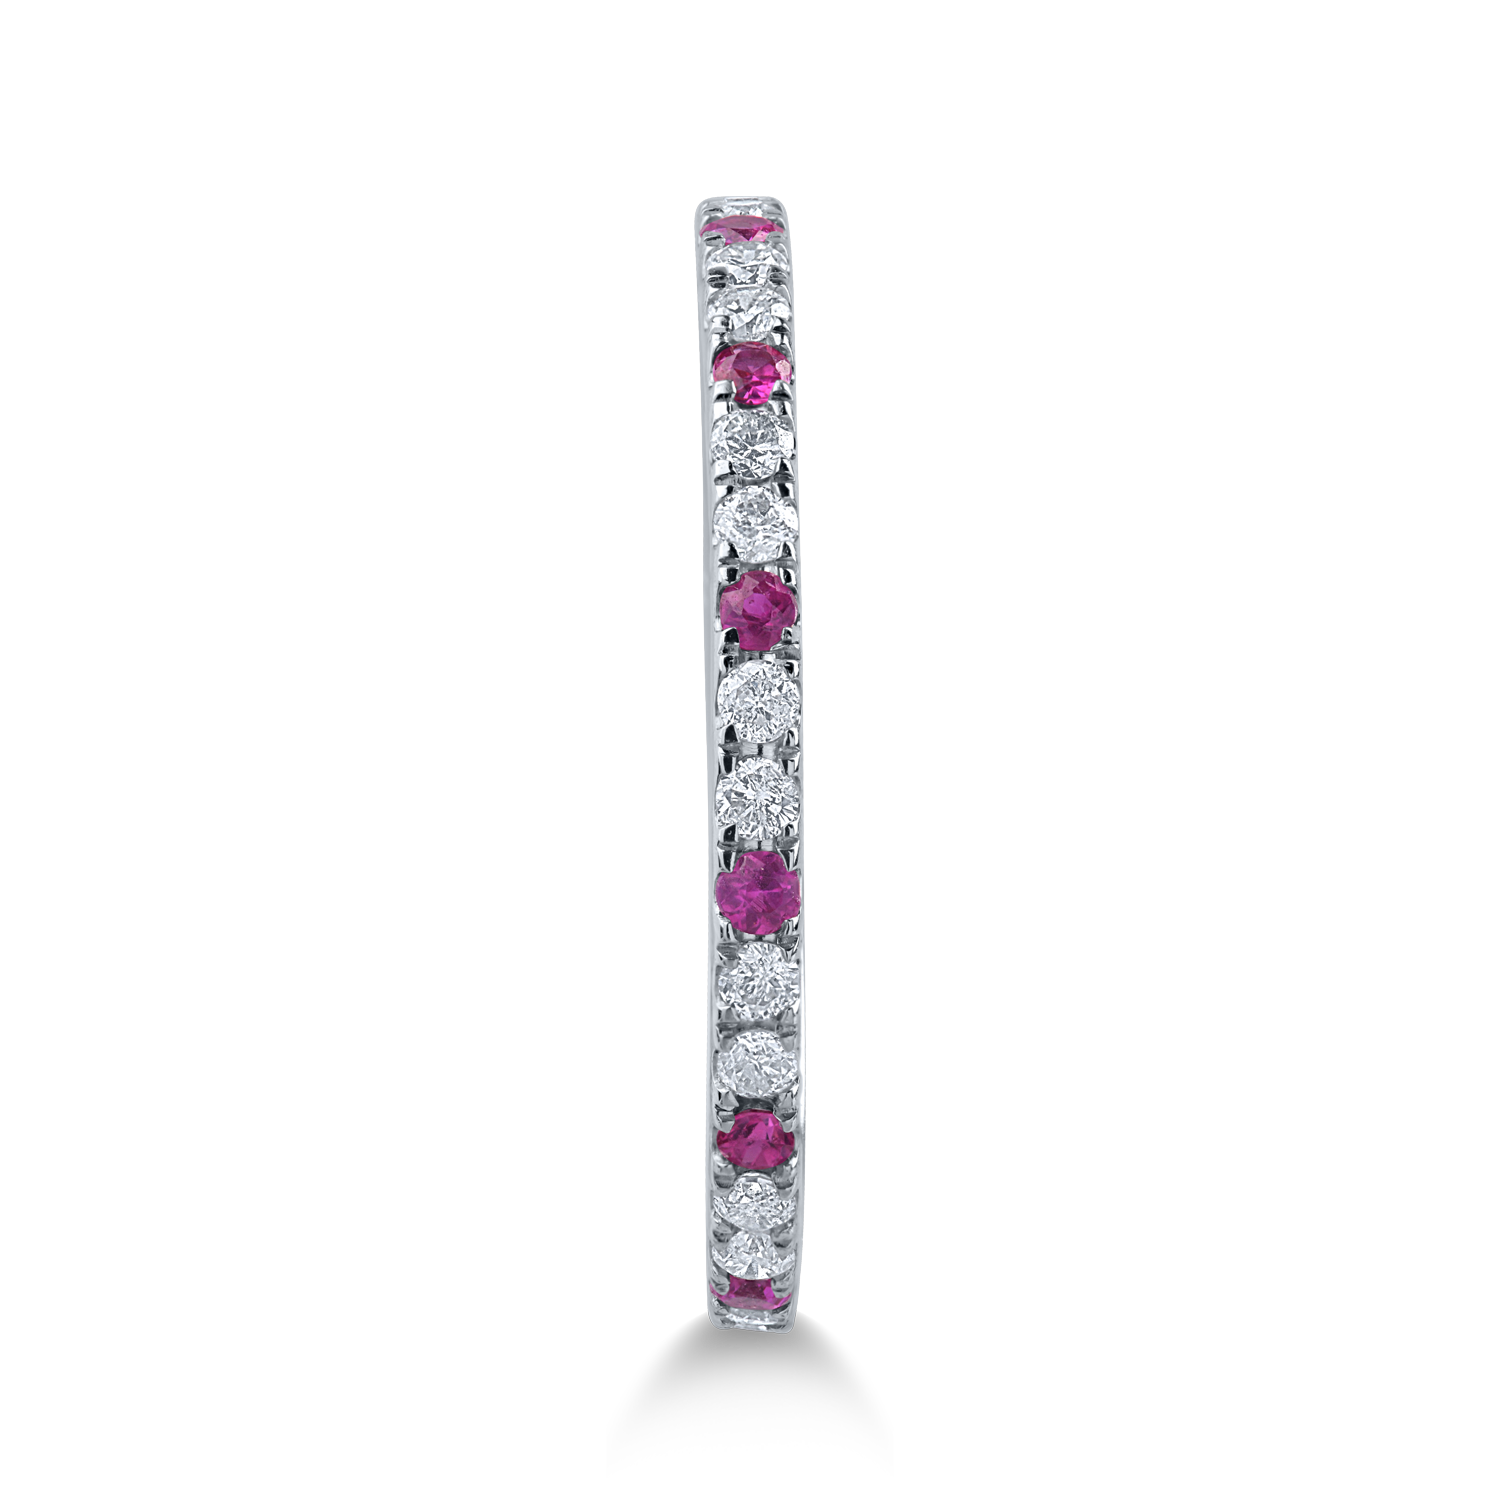 Half eternity ring in white gold with 0.1ct rubies and 0.18ct diamonds